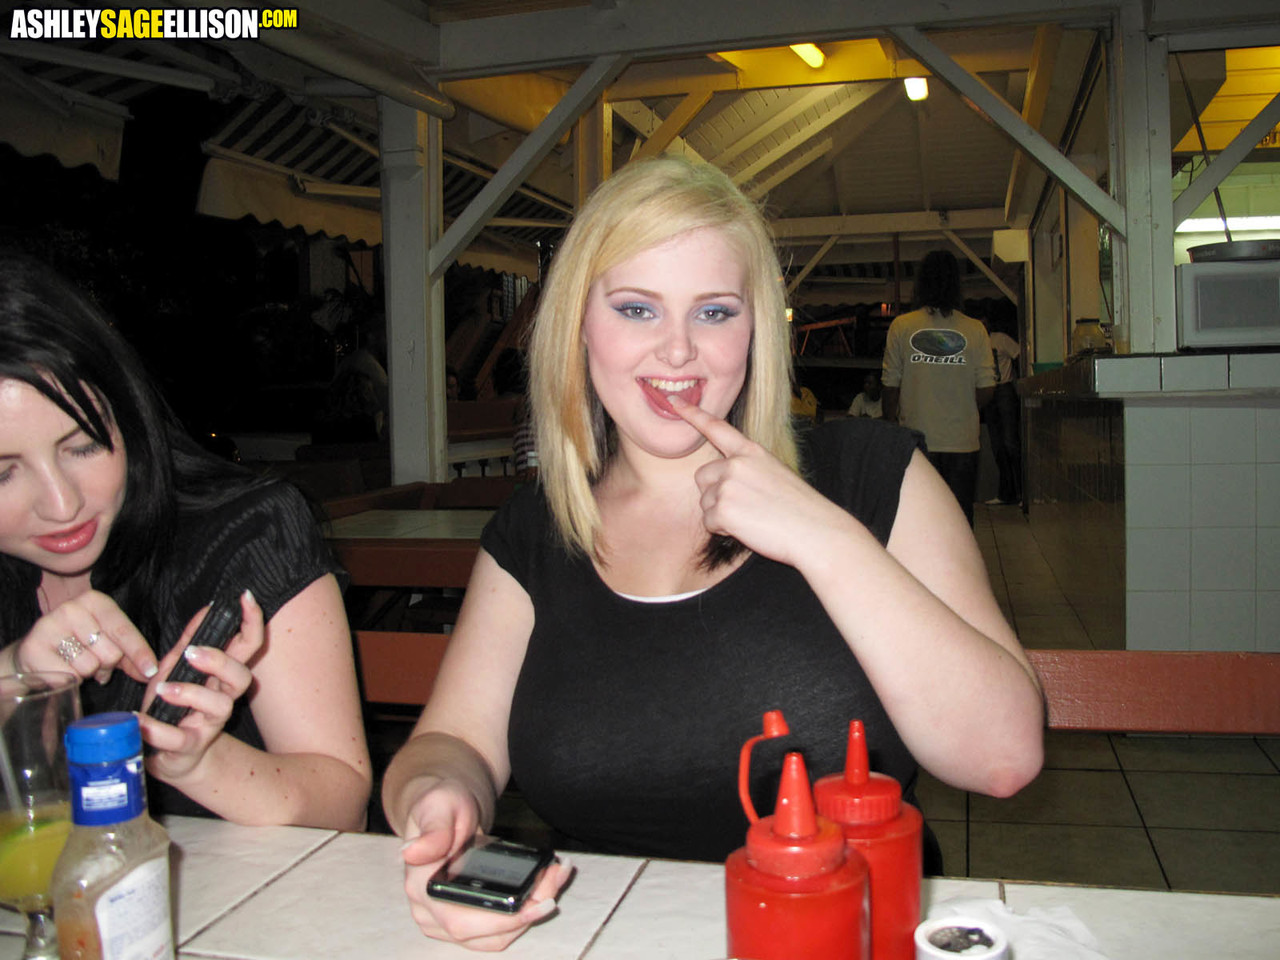 Fat chick Ashley Sage Ellison and her busty gf go out on the town foto pornográfica #426376435